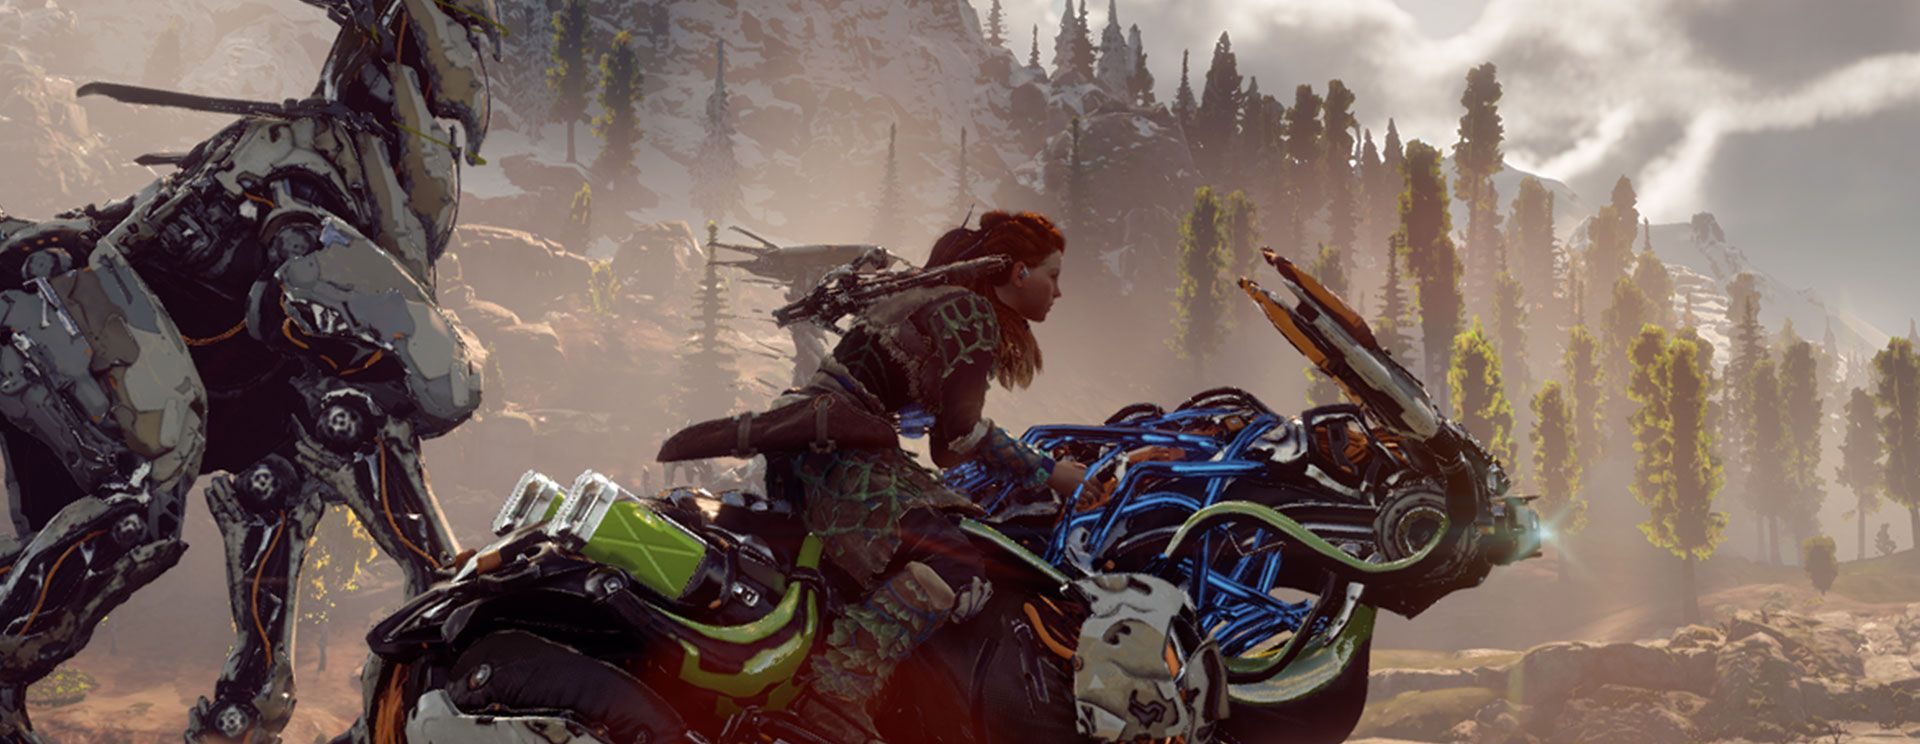 ≡ Horizon: Zero Dawn Is Officially Confirmed for PC 》 Game news ...